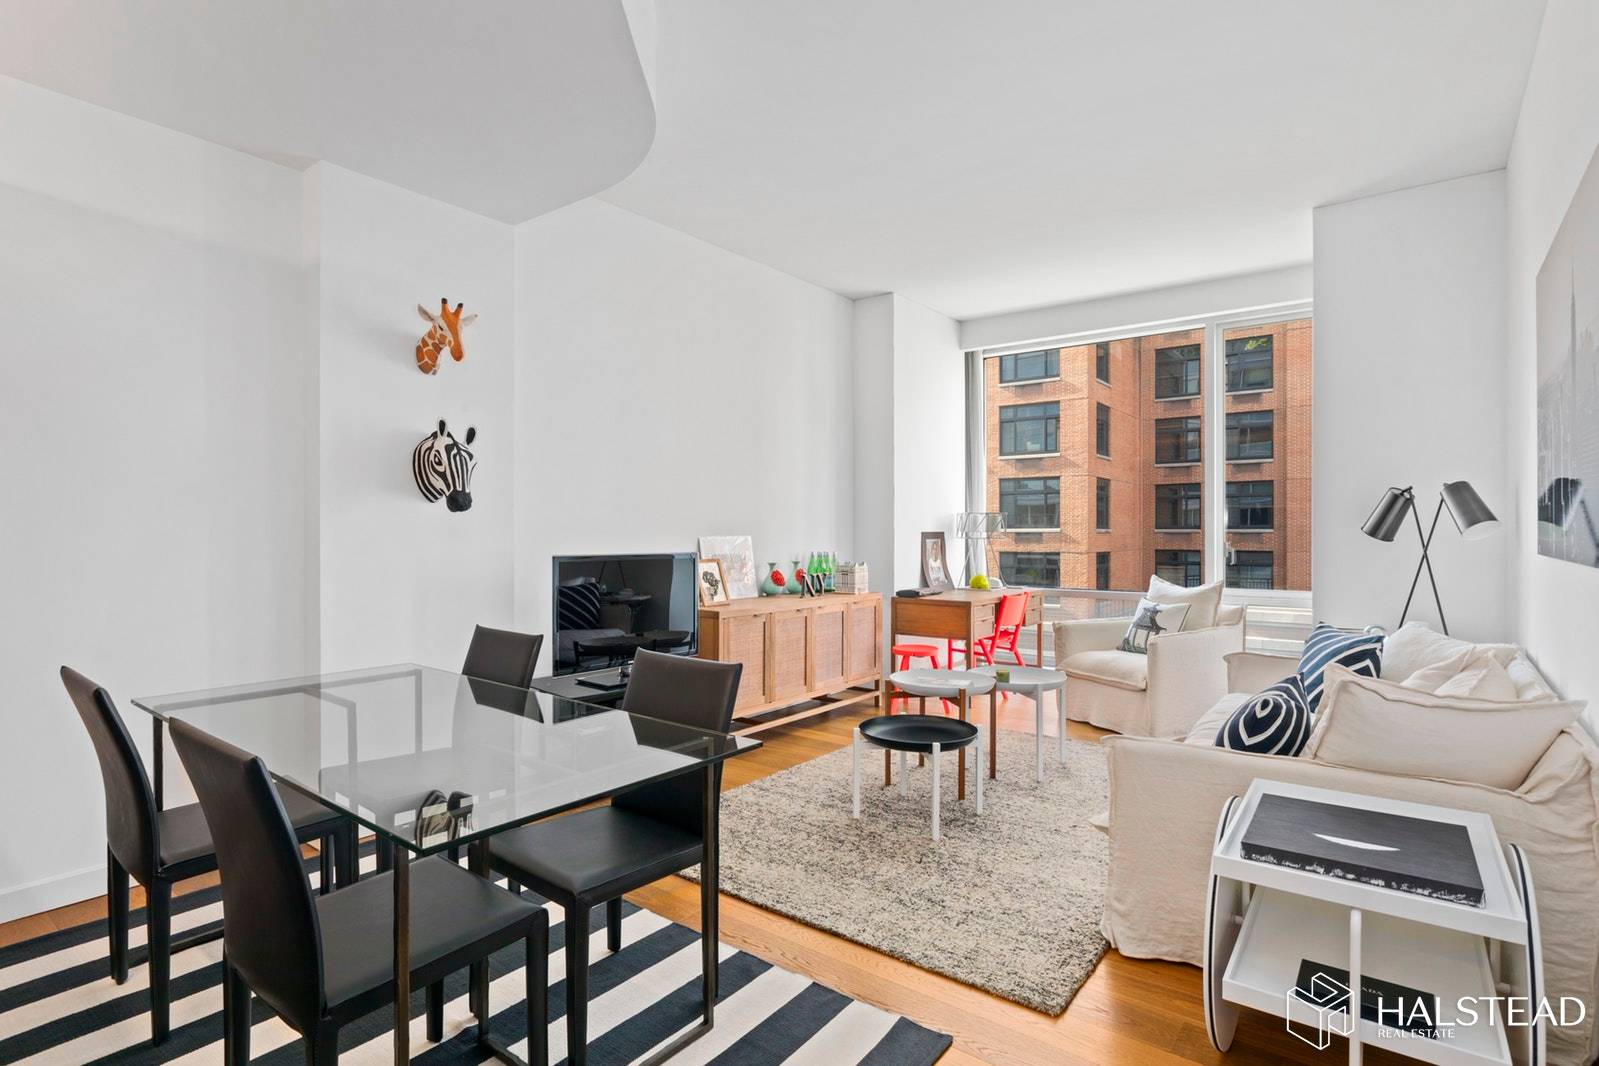 Available Furnished for 1 Year Minimum Reknowned architects Gwathmey Siegel designed this luxurious loft home with a light and airy feel, featuring high ceilings and wall to wall windows in ...